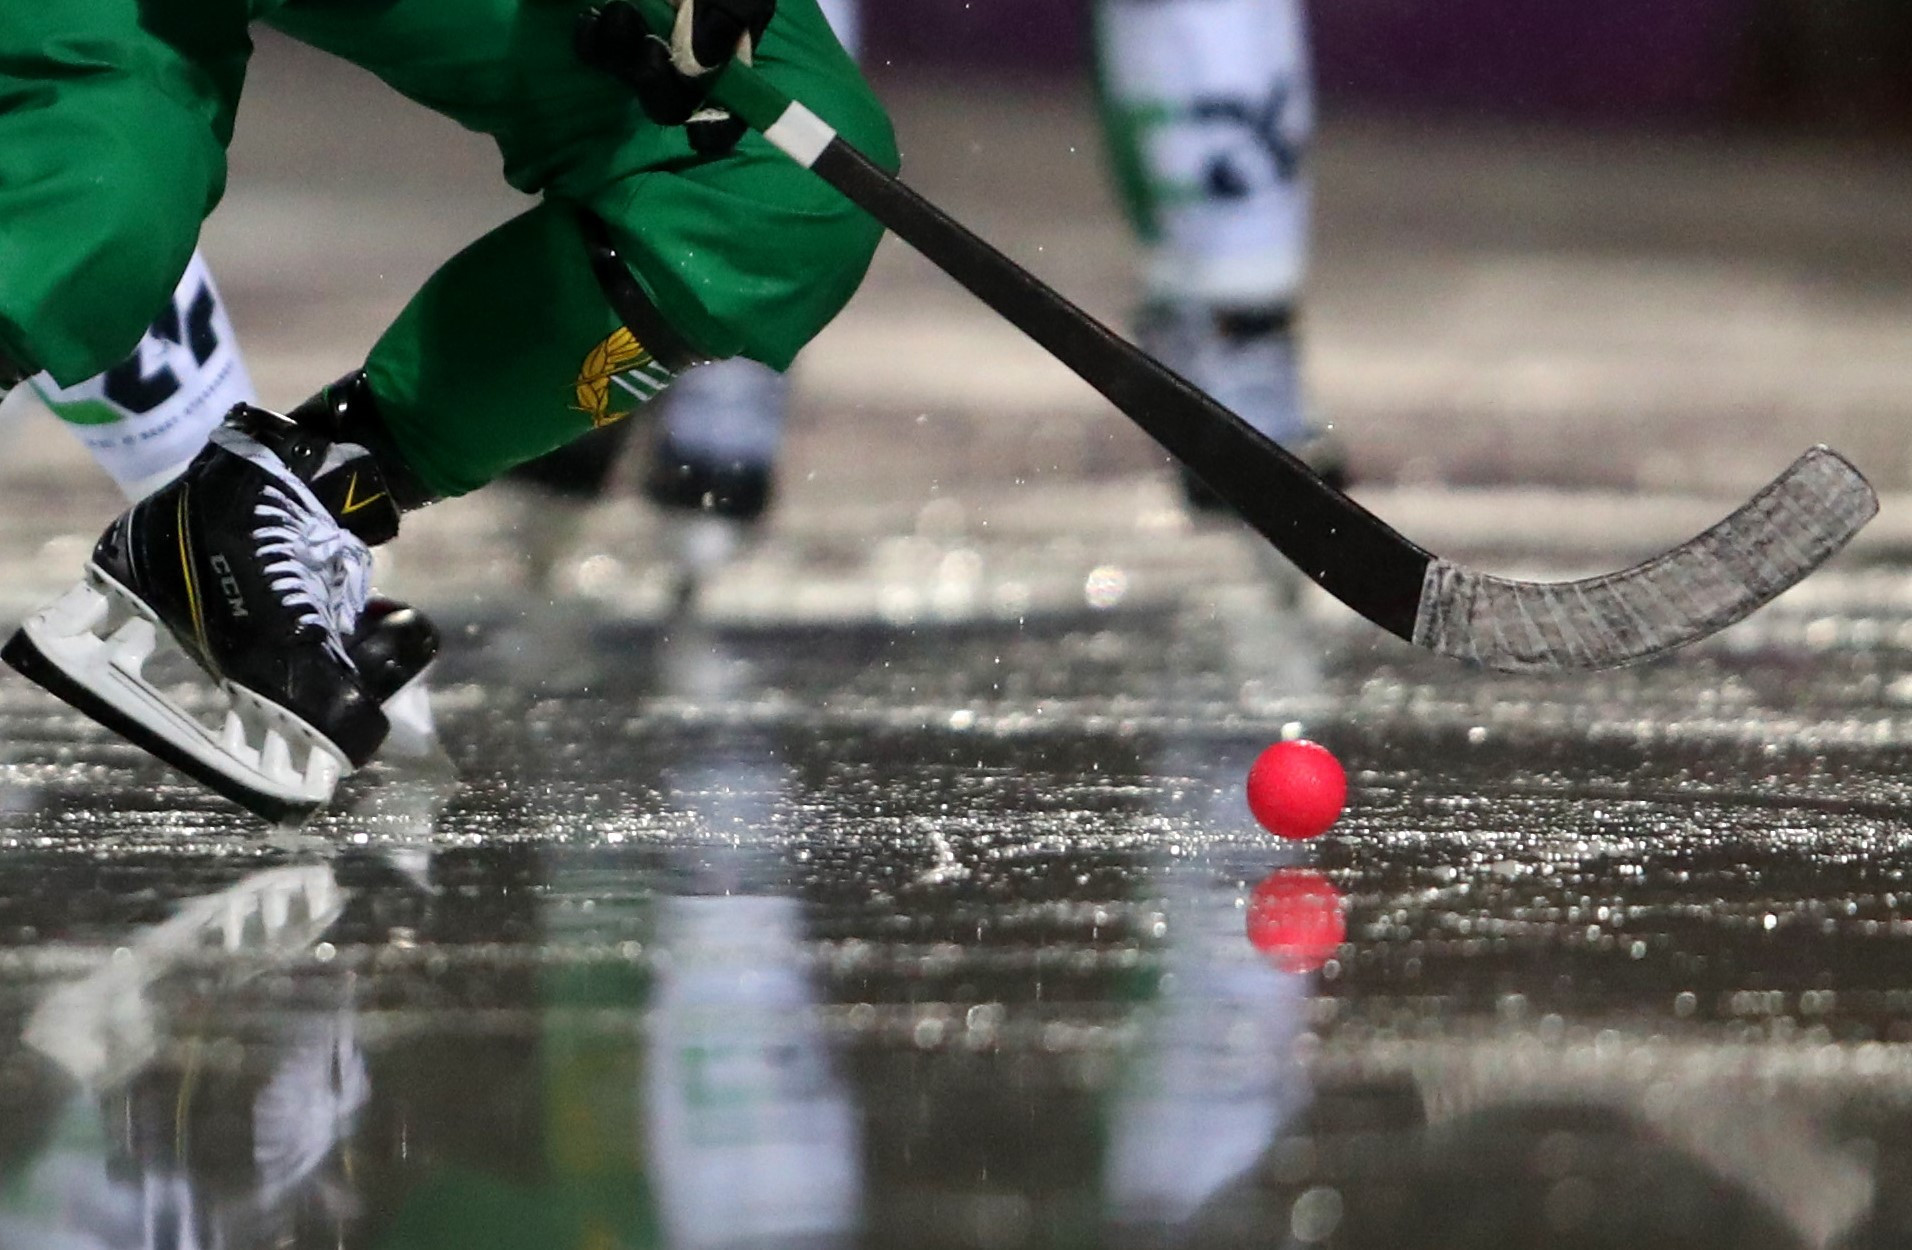 Bandy's World Championships have been exempted from the CAS ruling ©Getty Images